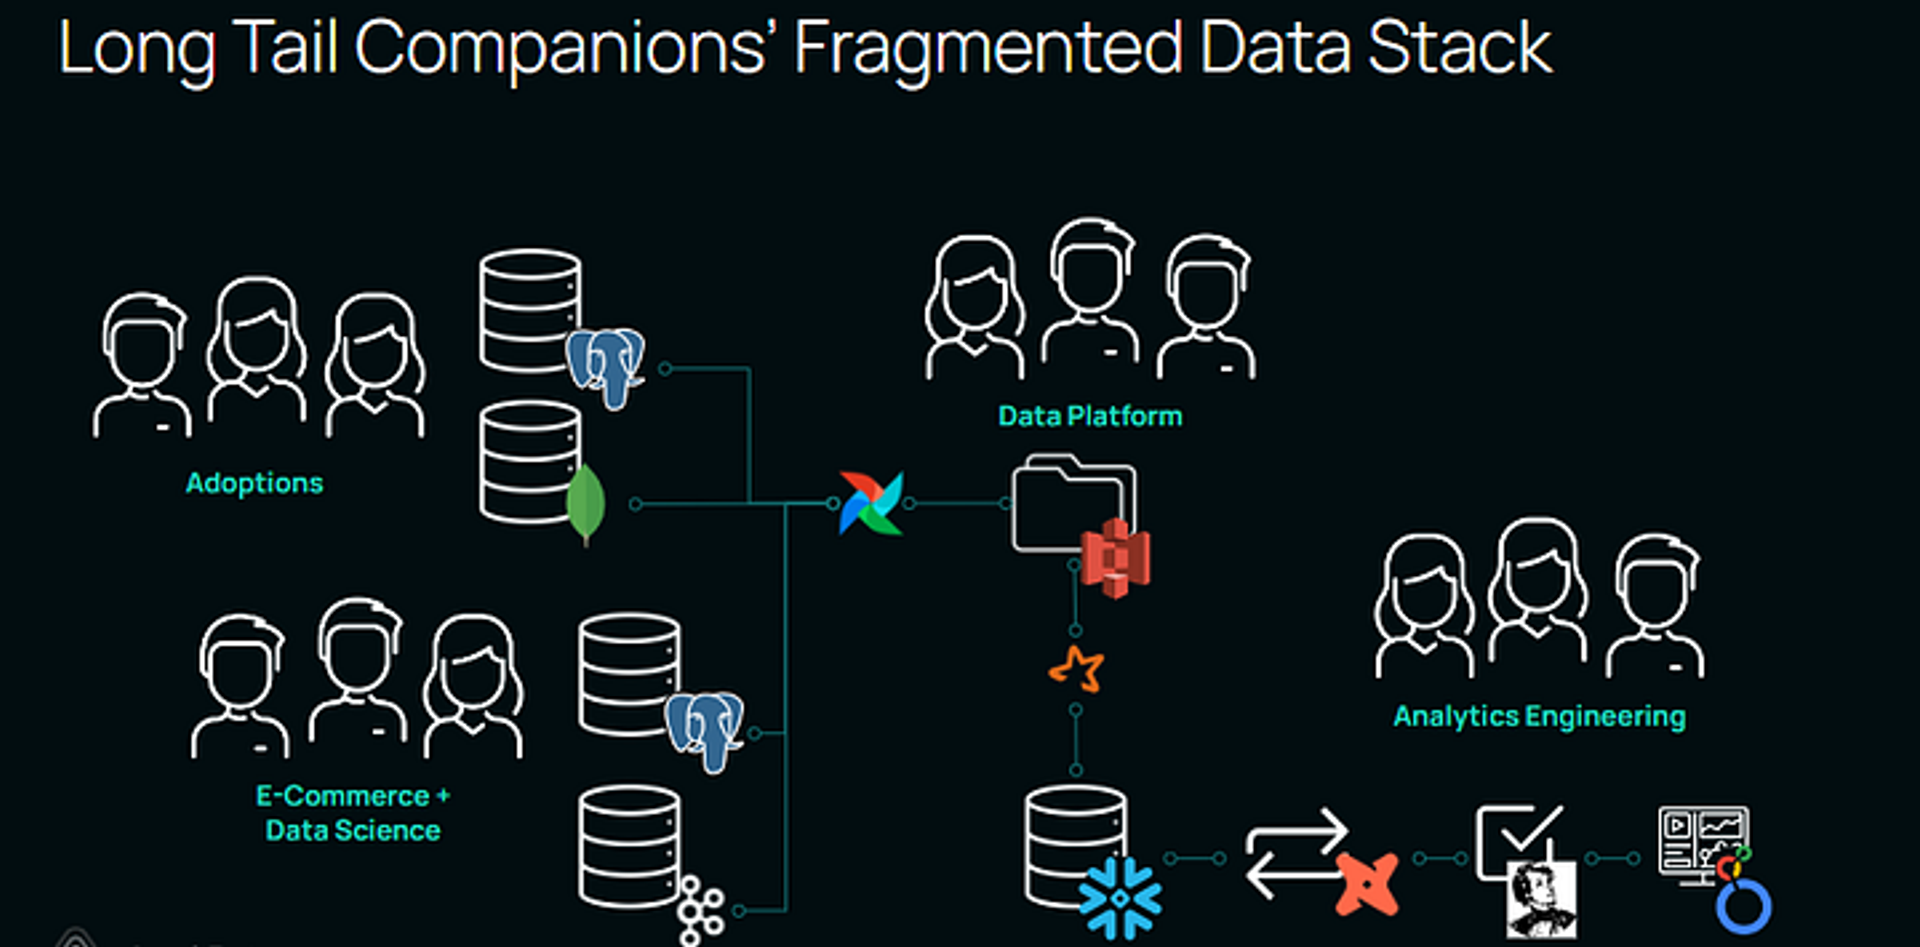 Long Tail Companions' Fragmented Data Stack